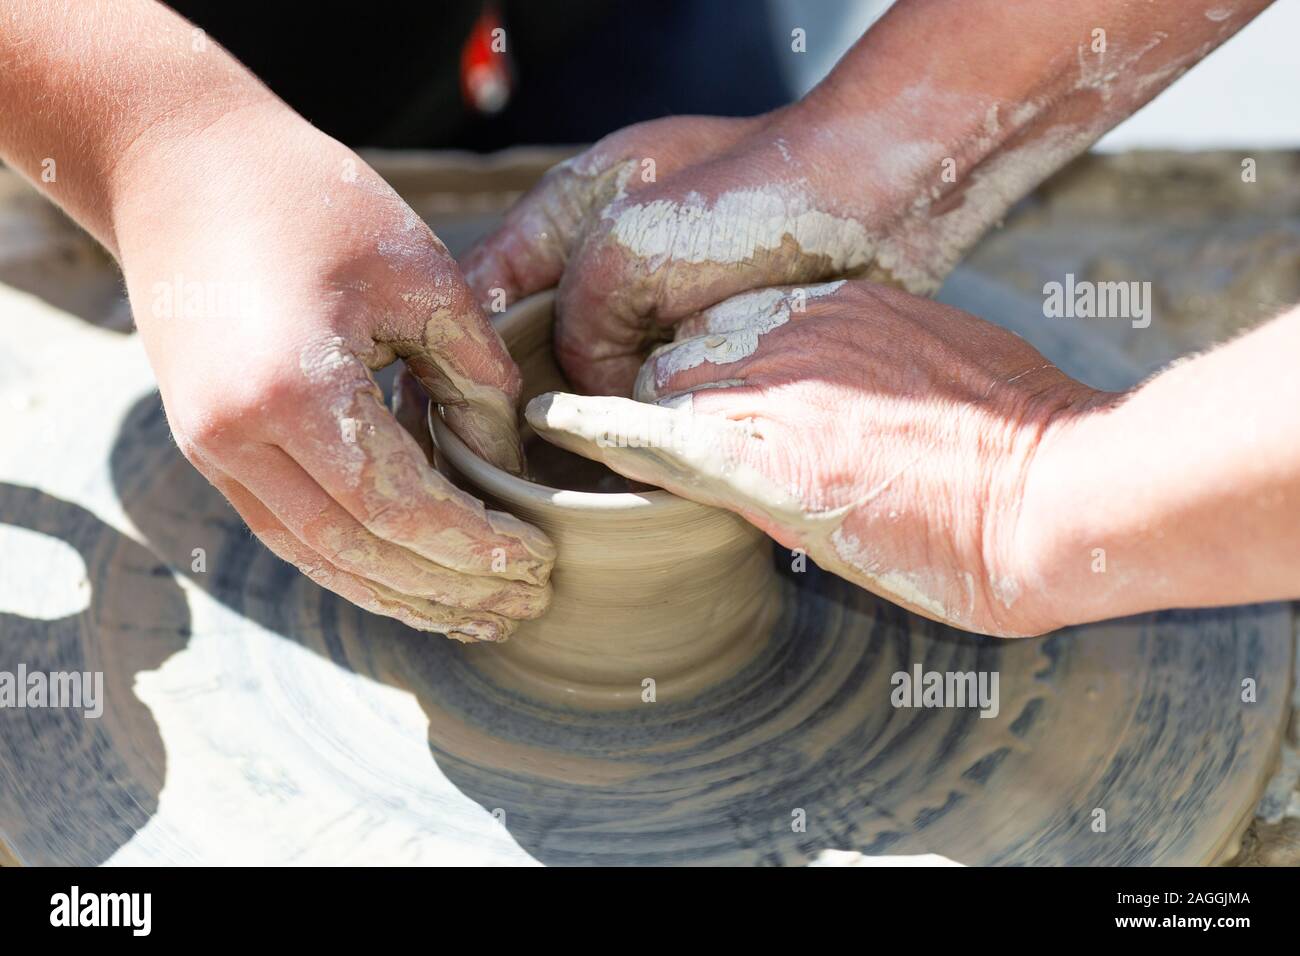 Teaching in masterful studio of ceramics works with clay on a potter's wheel Stock Photo